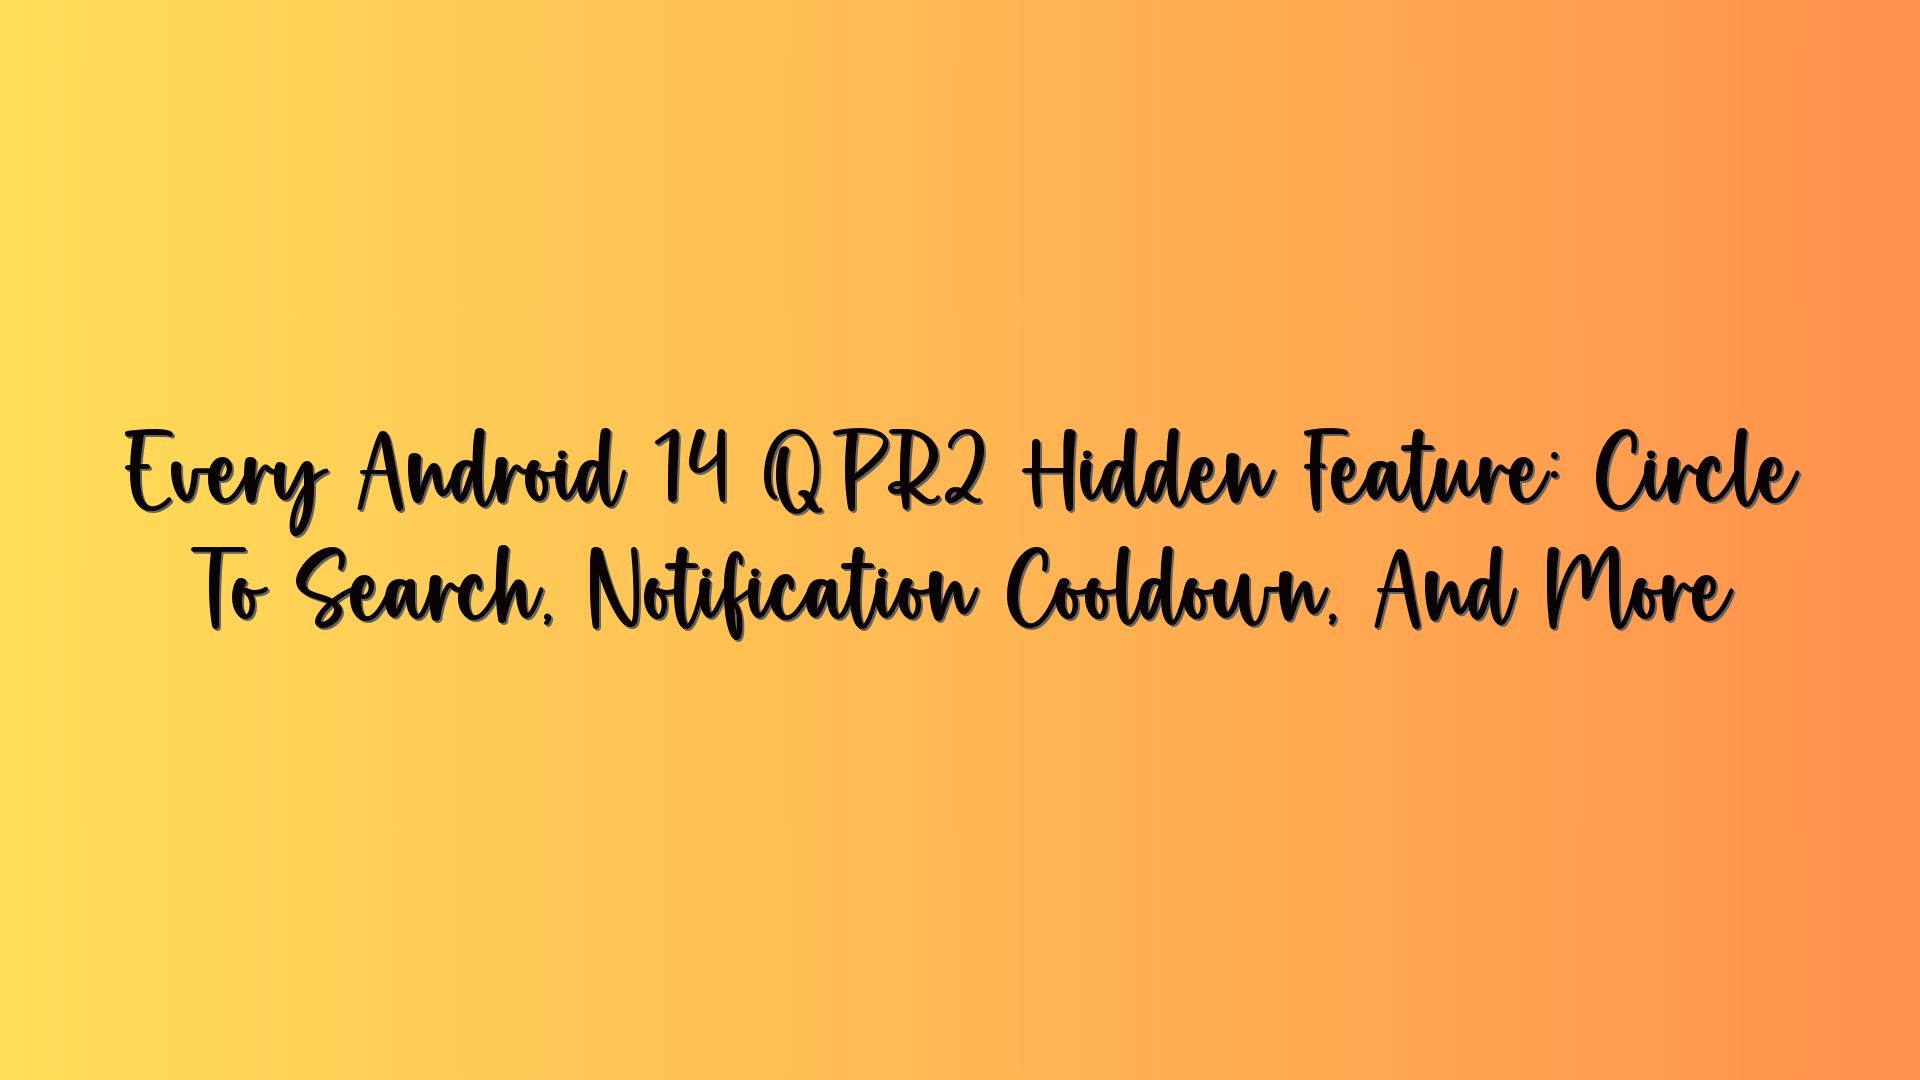 Every Android 14 QPR2 Hidden Feature: Circle To Search, Notification Cooldown, And More